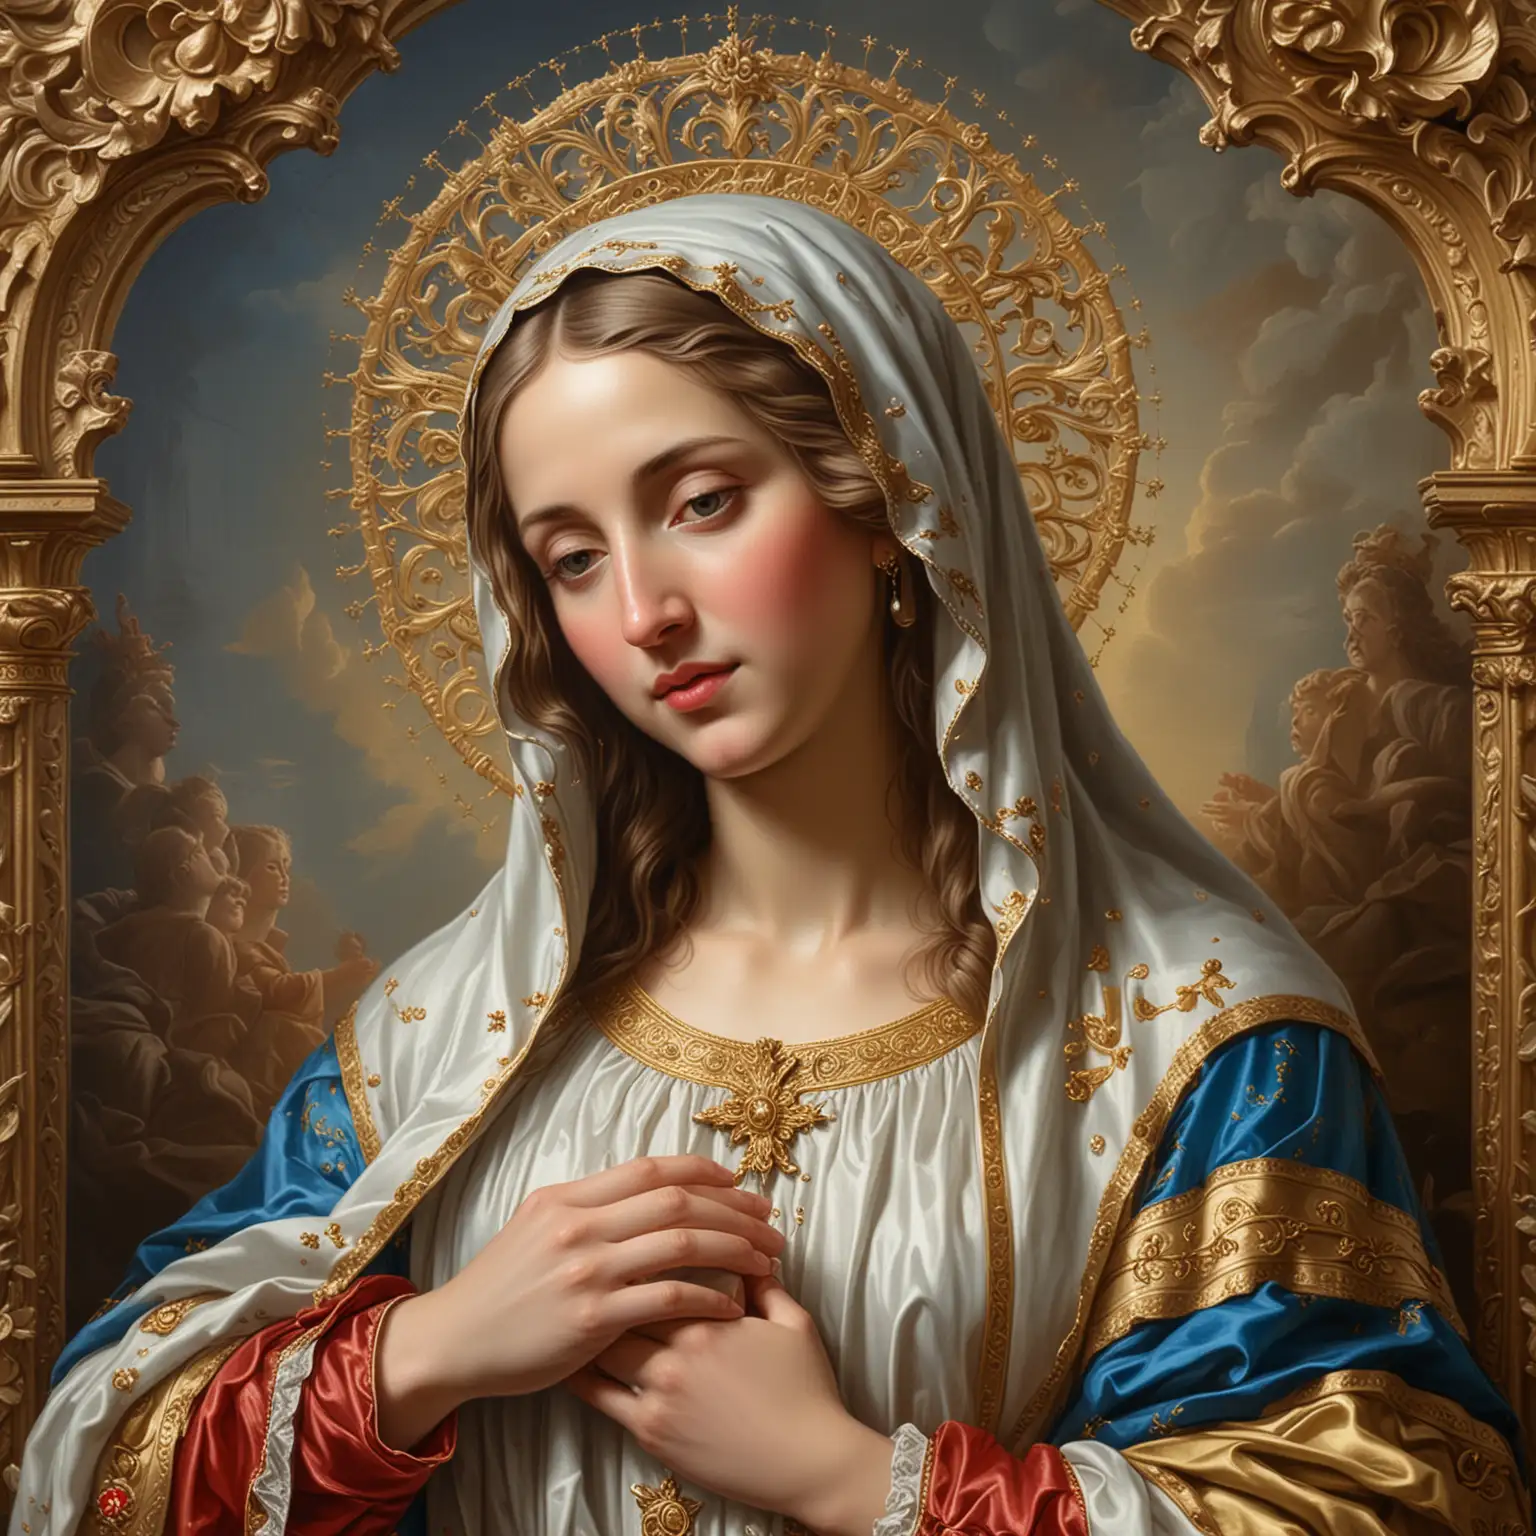 Exquisite Rococo Style Portrait of the Virgin Mary Gazing Upon the Viewer